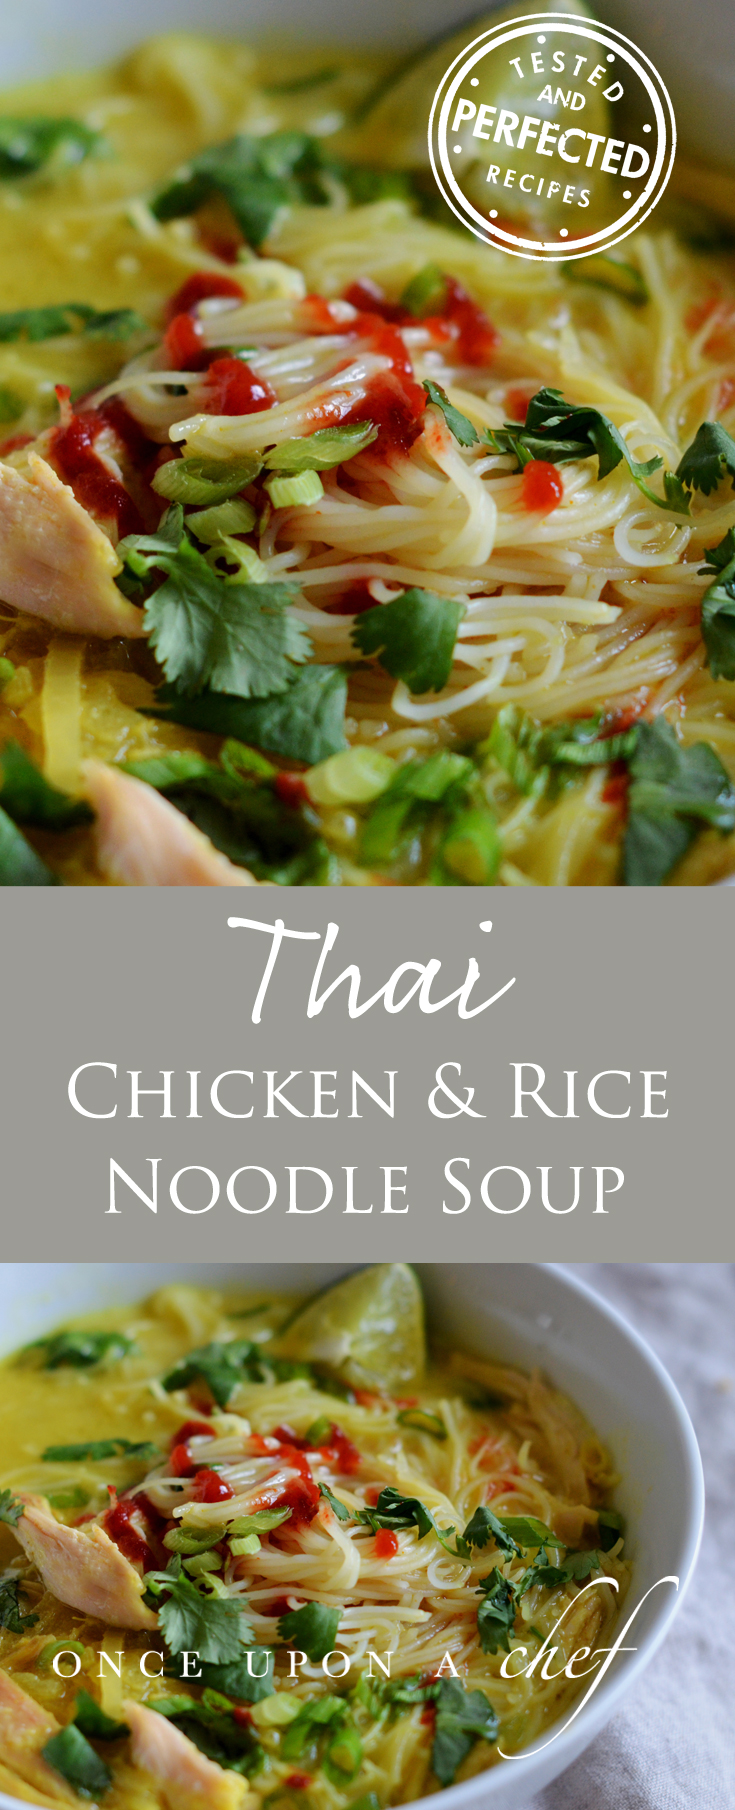 Thai Chicken & Rice Noodle Soup - Once Upon a Chef